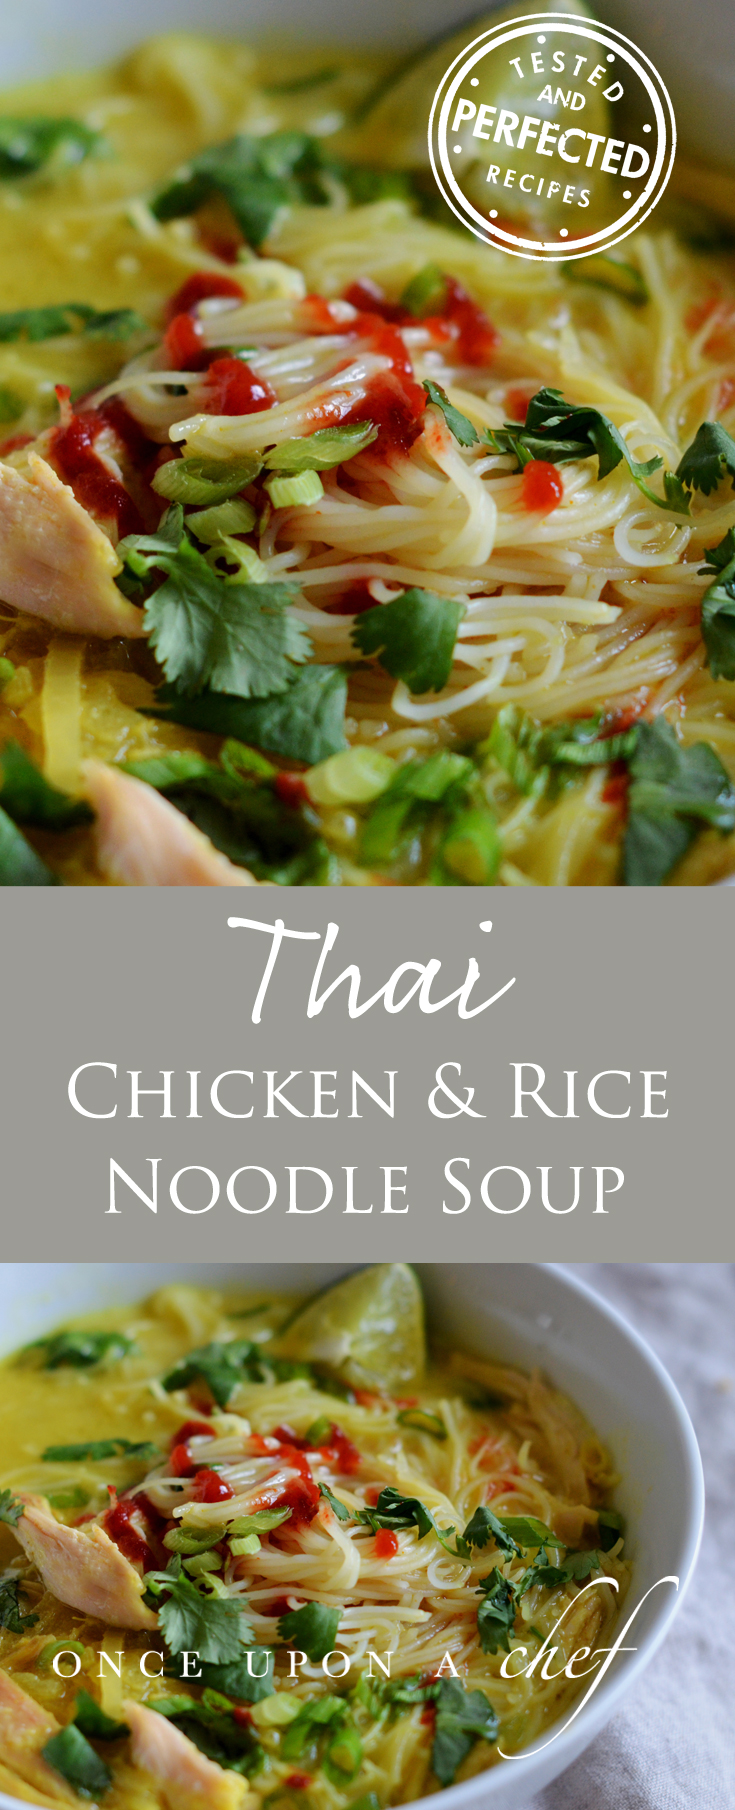 Thai Chicken & Rice Noodle Soup - Once Upon a Chef